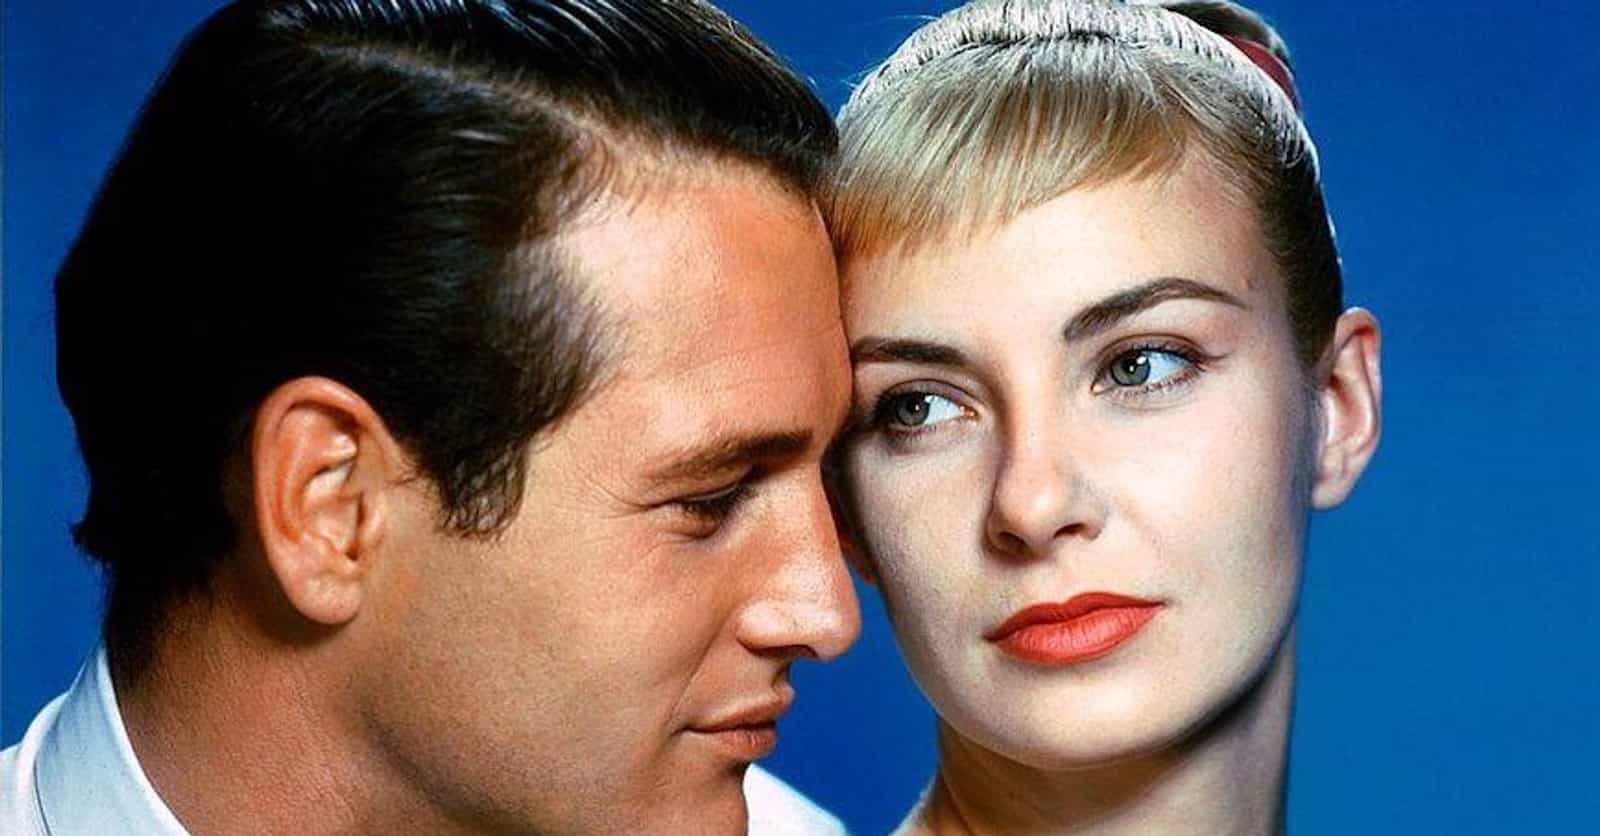 Facts About Old Hollywood Power Couples That Reveal What They Were Really Like